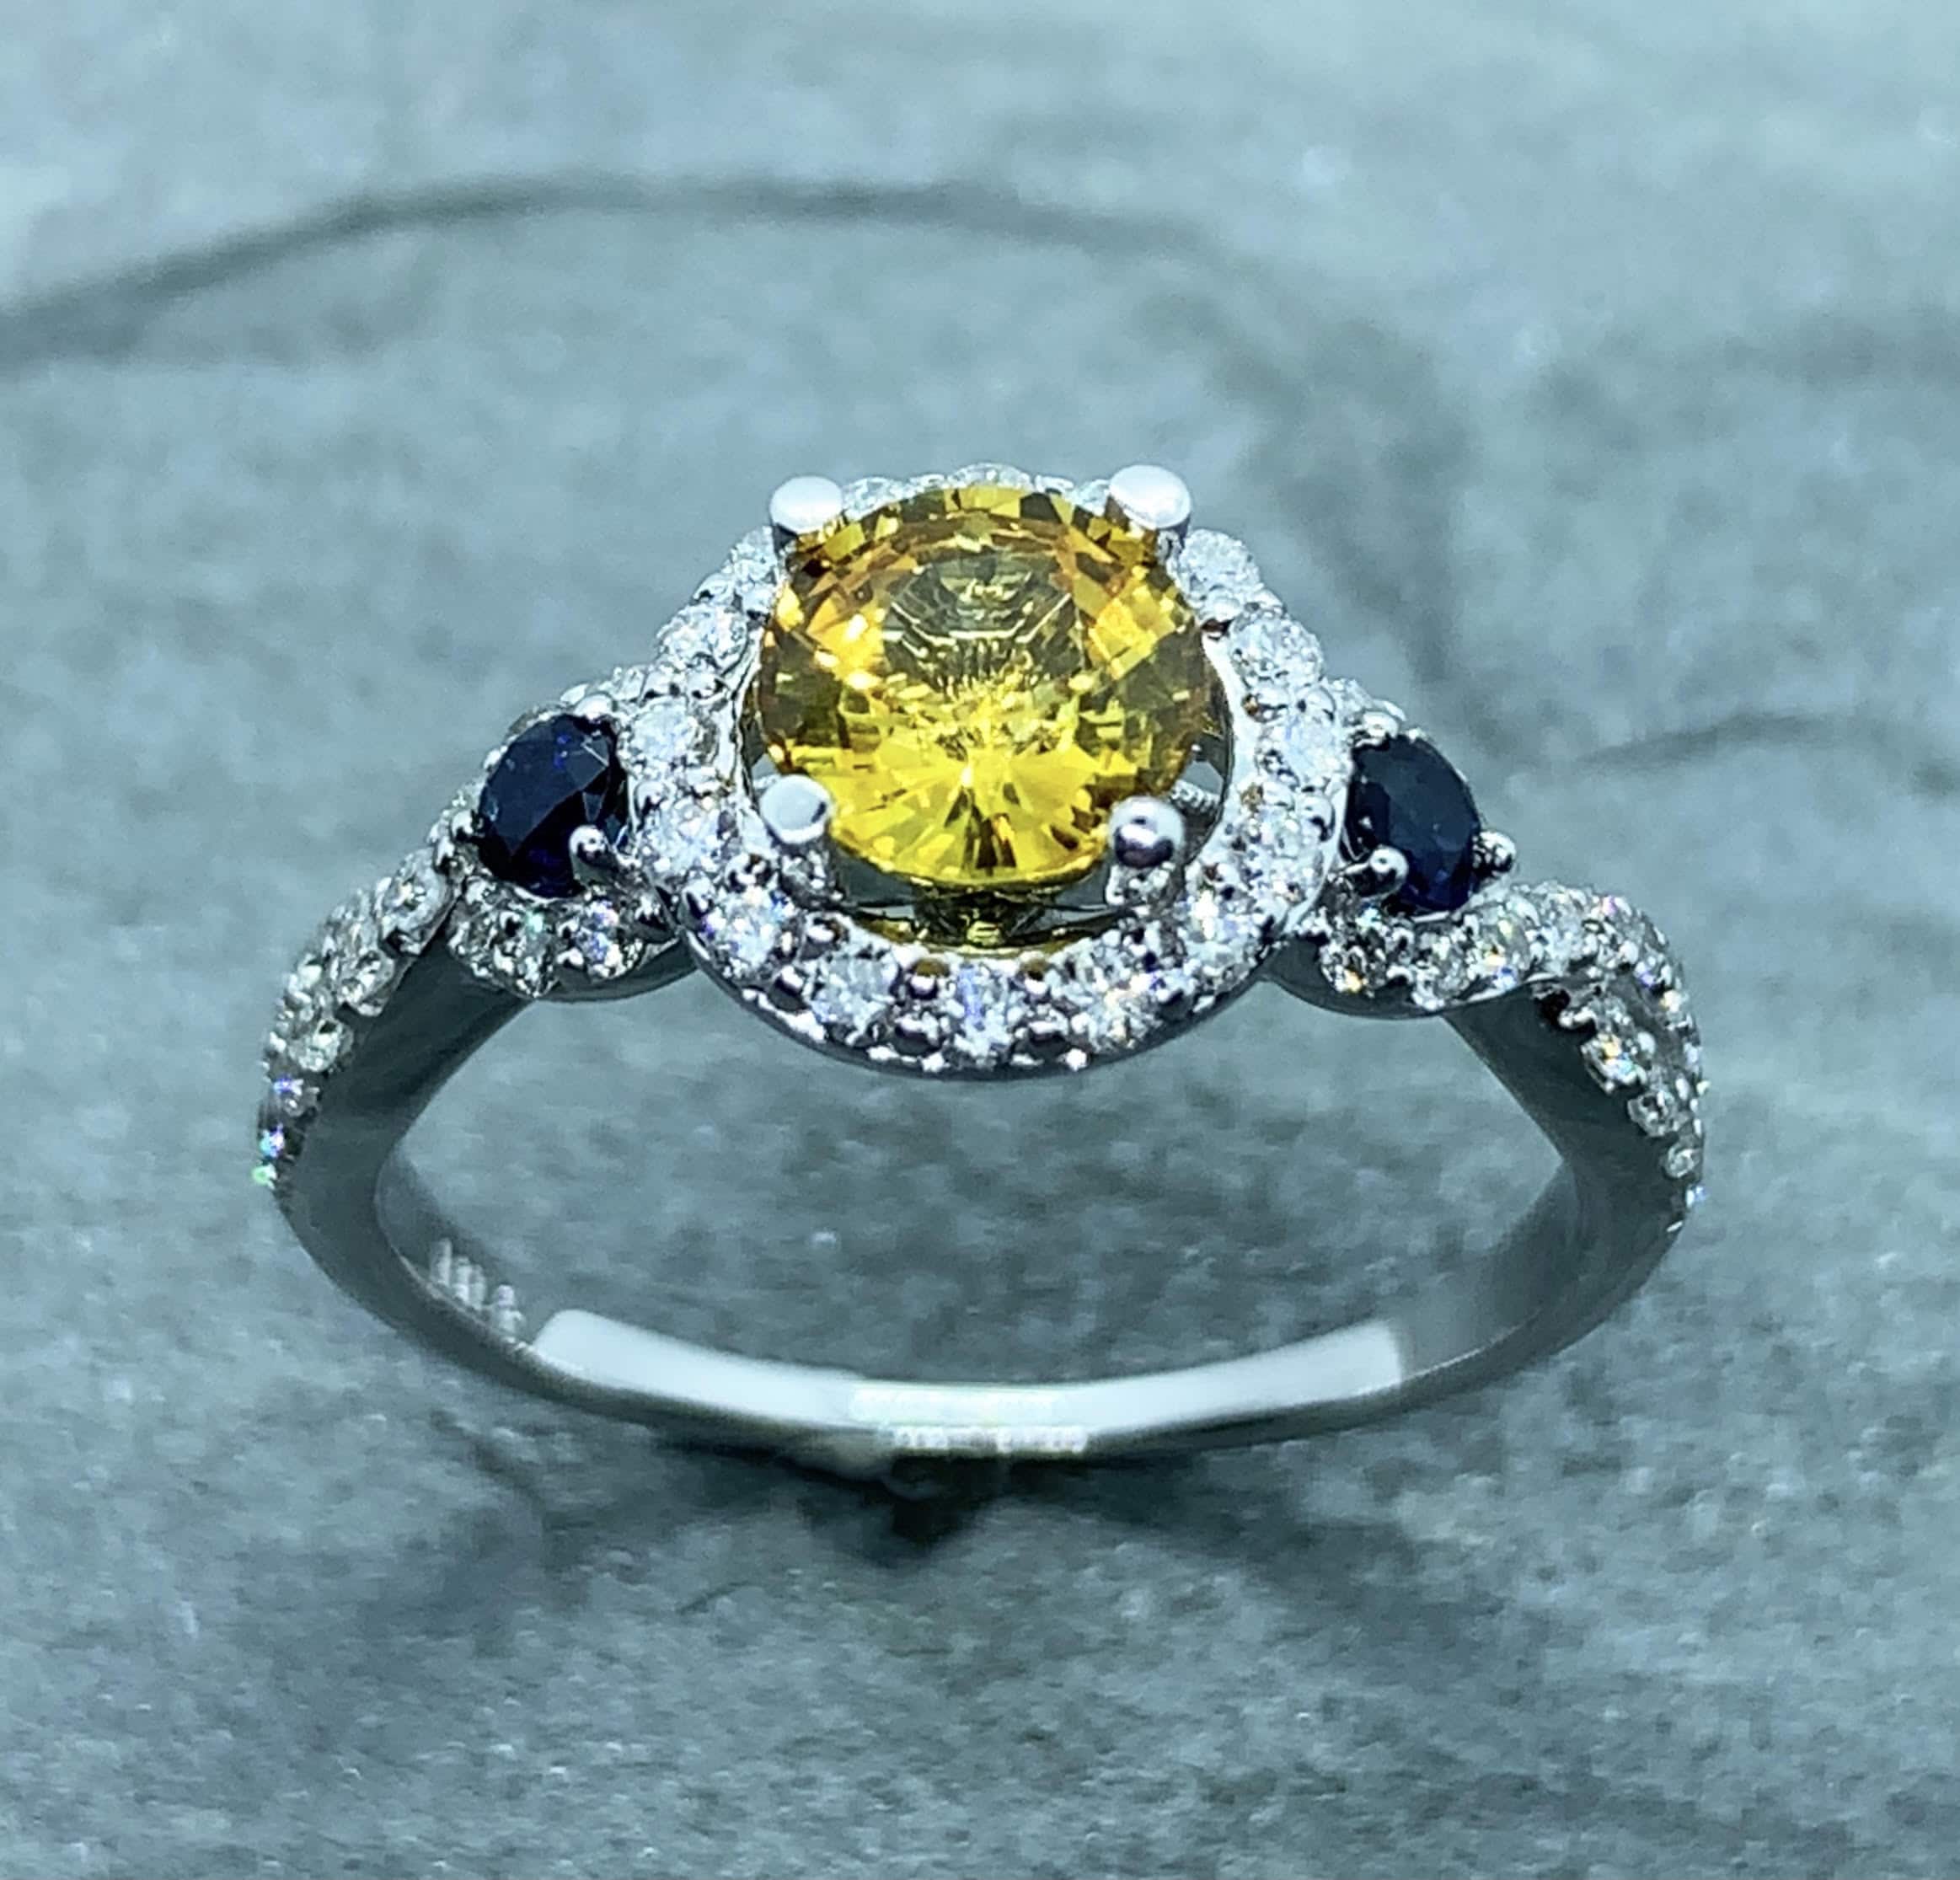 Blue & Yellow Sapphire Ring | Exquisite Jewelry for Every Occasion | FWCJ-nlmtdanang.com.vn